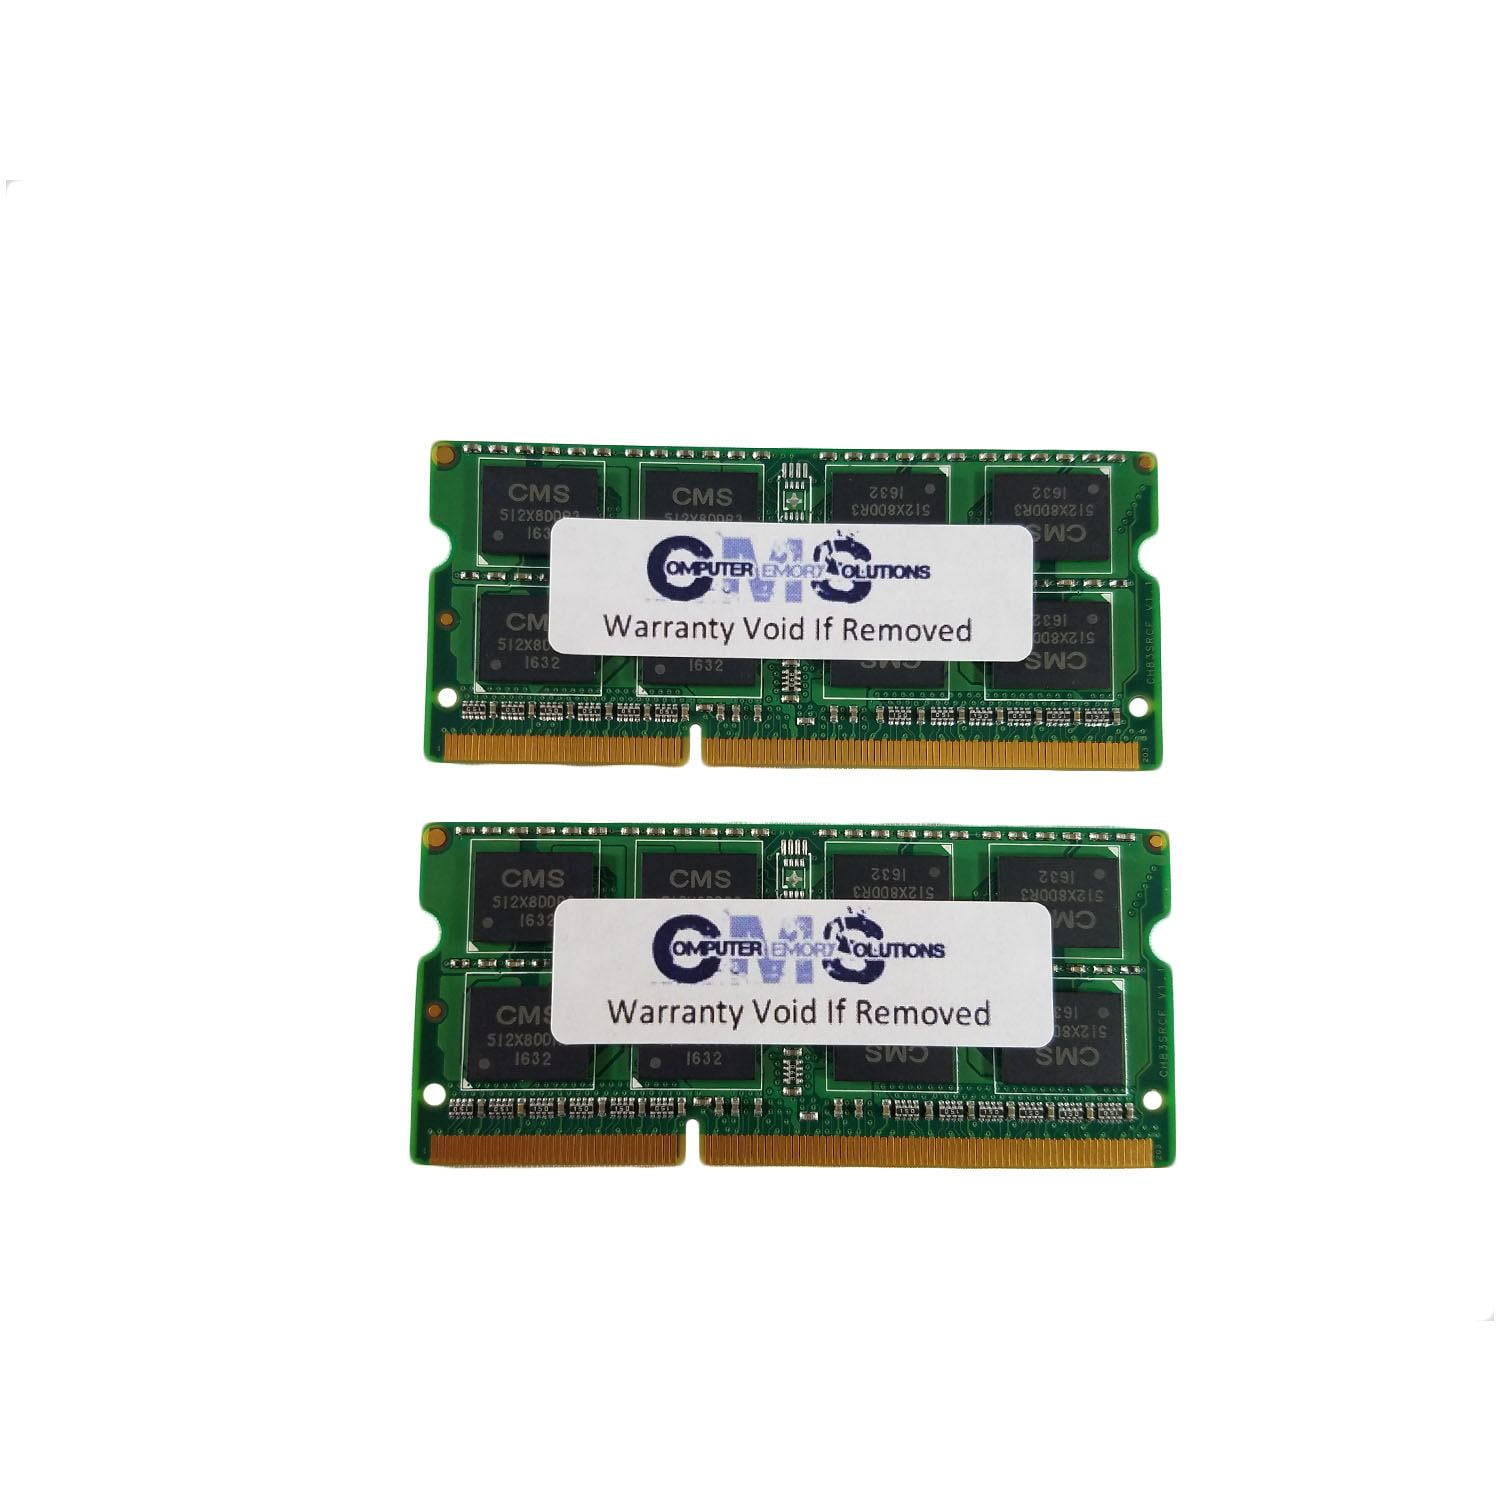 16GB (2X8GB) DDR3 12800 1600MHz NON ECC SODIMM Memory Ram Upgrade Compatible with Synology® DiskStation DS218+ - A7 Walmart.com